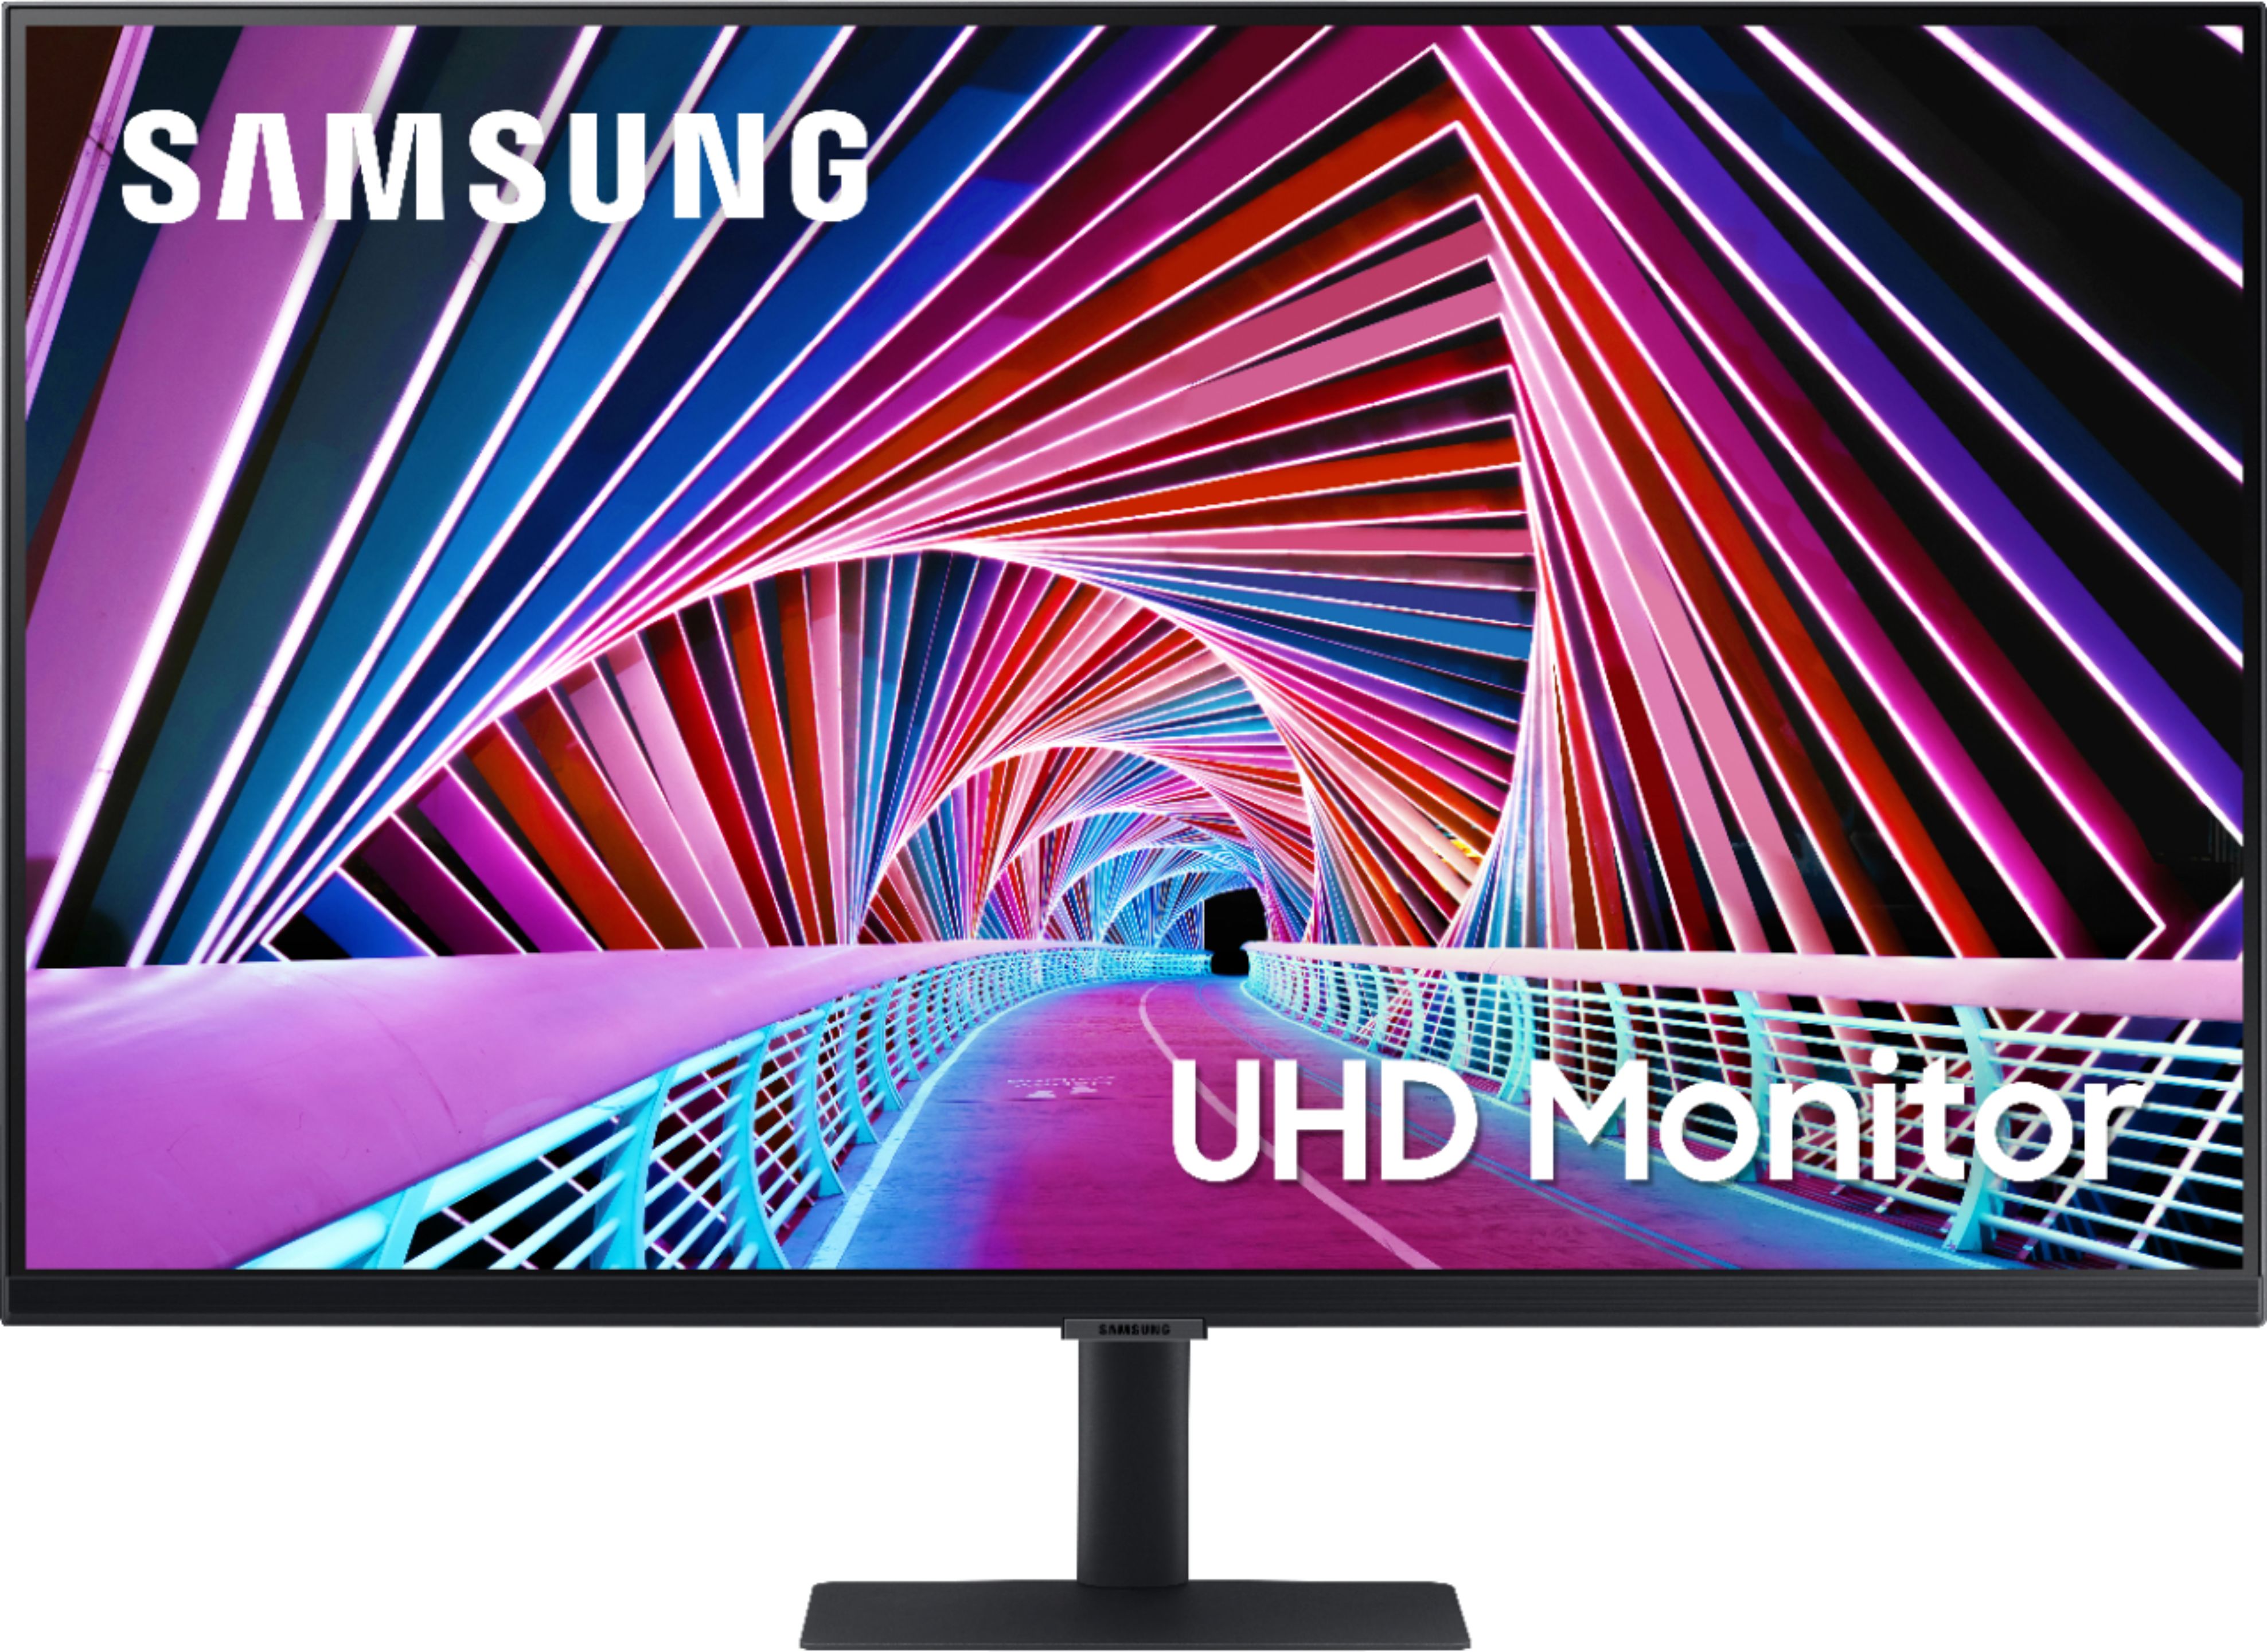 Samsung Geek Squad Certified Refurbished A700 Series 32 LED 4K UHD Monitor  with HDR (HDMI, DP) Black GSRF LS32A700NWNXZA - Best Buy